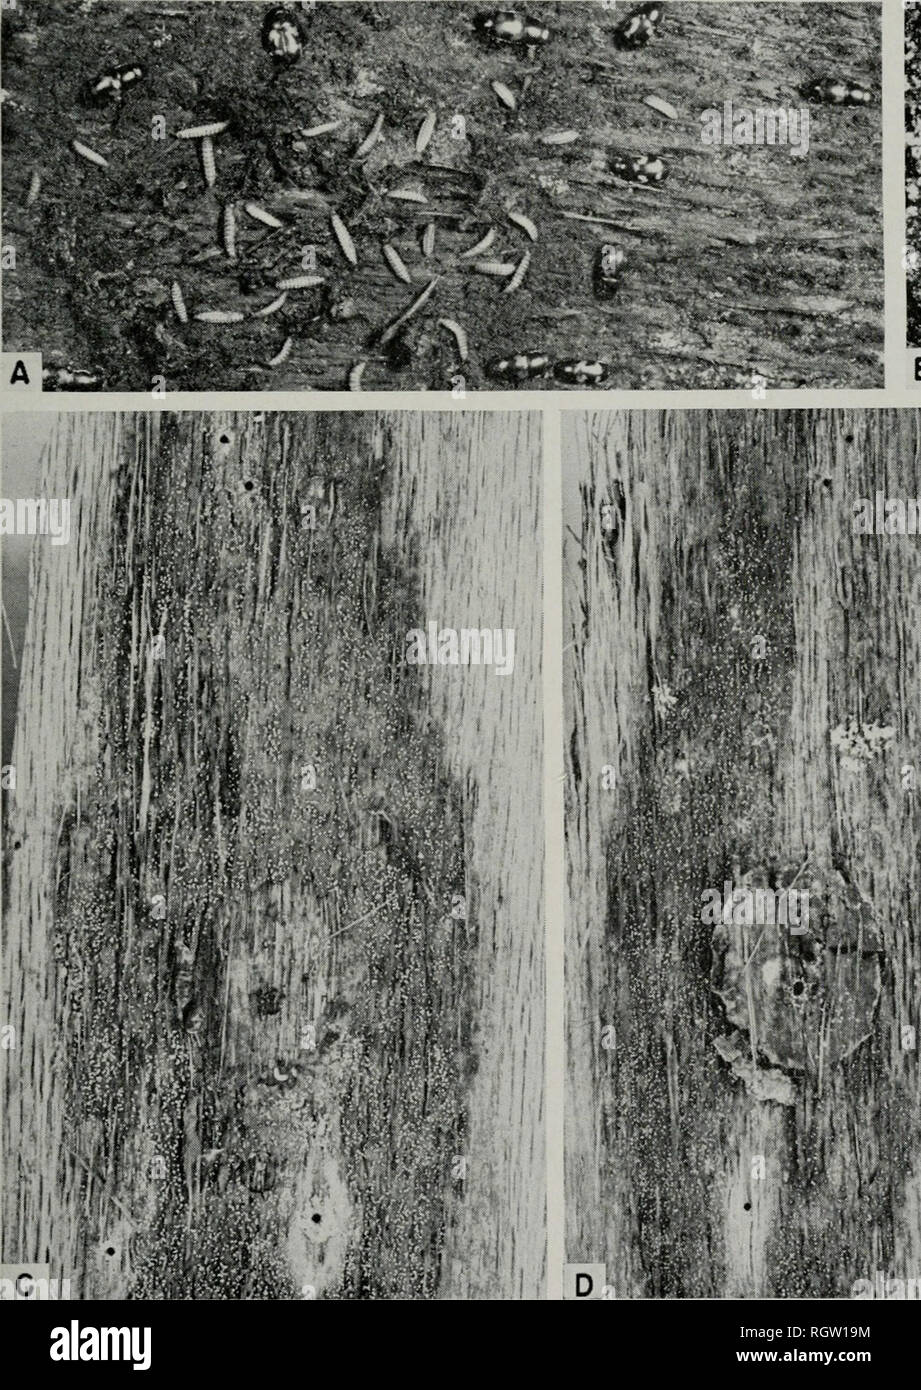 . Bulletin. Natural history; Natural history. June, 1955 Curl: Oak Wilt Ixocula 307 melanogaster, which, like the Nitidulidae, is attracted to mycelial mats of the oak wilt fungus and to bleeding wounds on healthy oak trees, might be a vector of oak wilt. In the study reported here, many other insects were found to be asso- ciated with naturally occurring fungus mats. From October, 1952, through July, 1953, at least 40 species of insects belong- ing to at least ZZ genera of 19 families (exclusive of Collembola) were collected from mycelial mats on wilt-killed oak trees in Illinois, tables 13 a Stock Photo